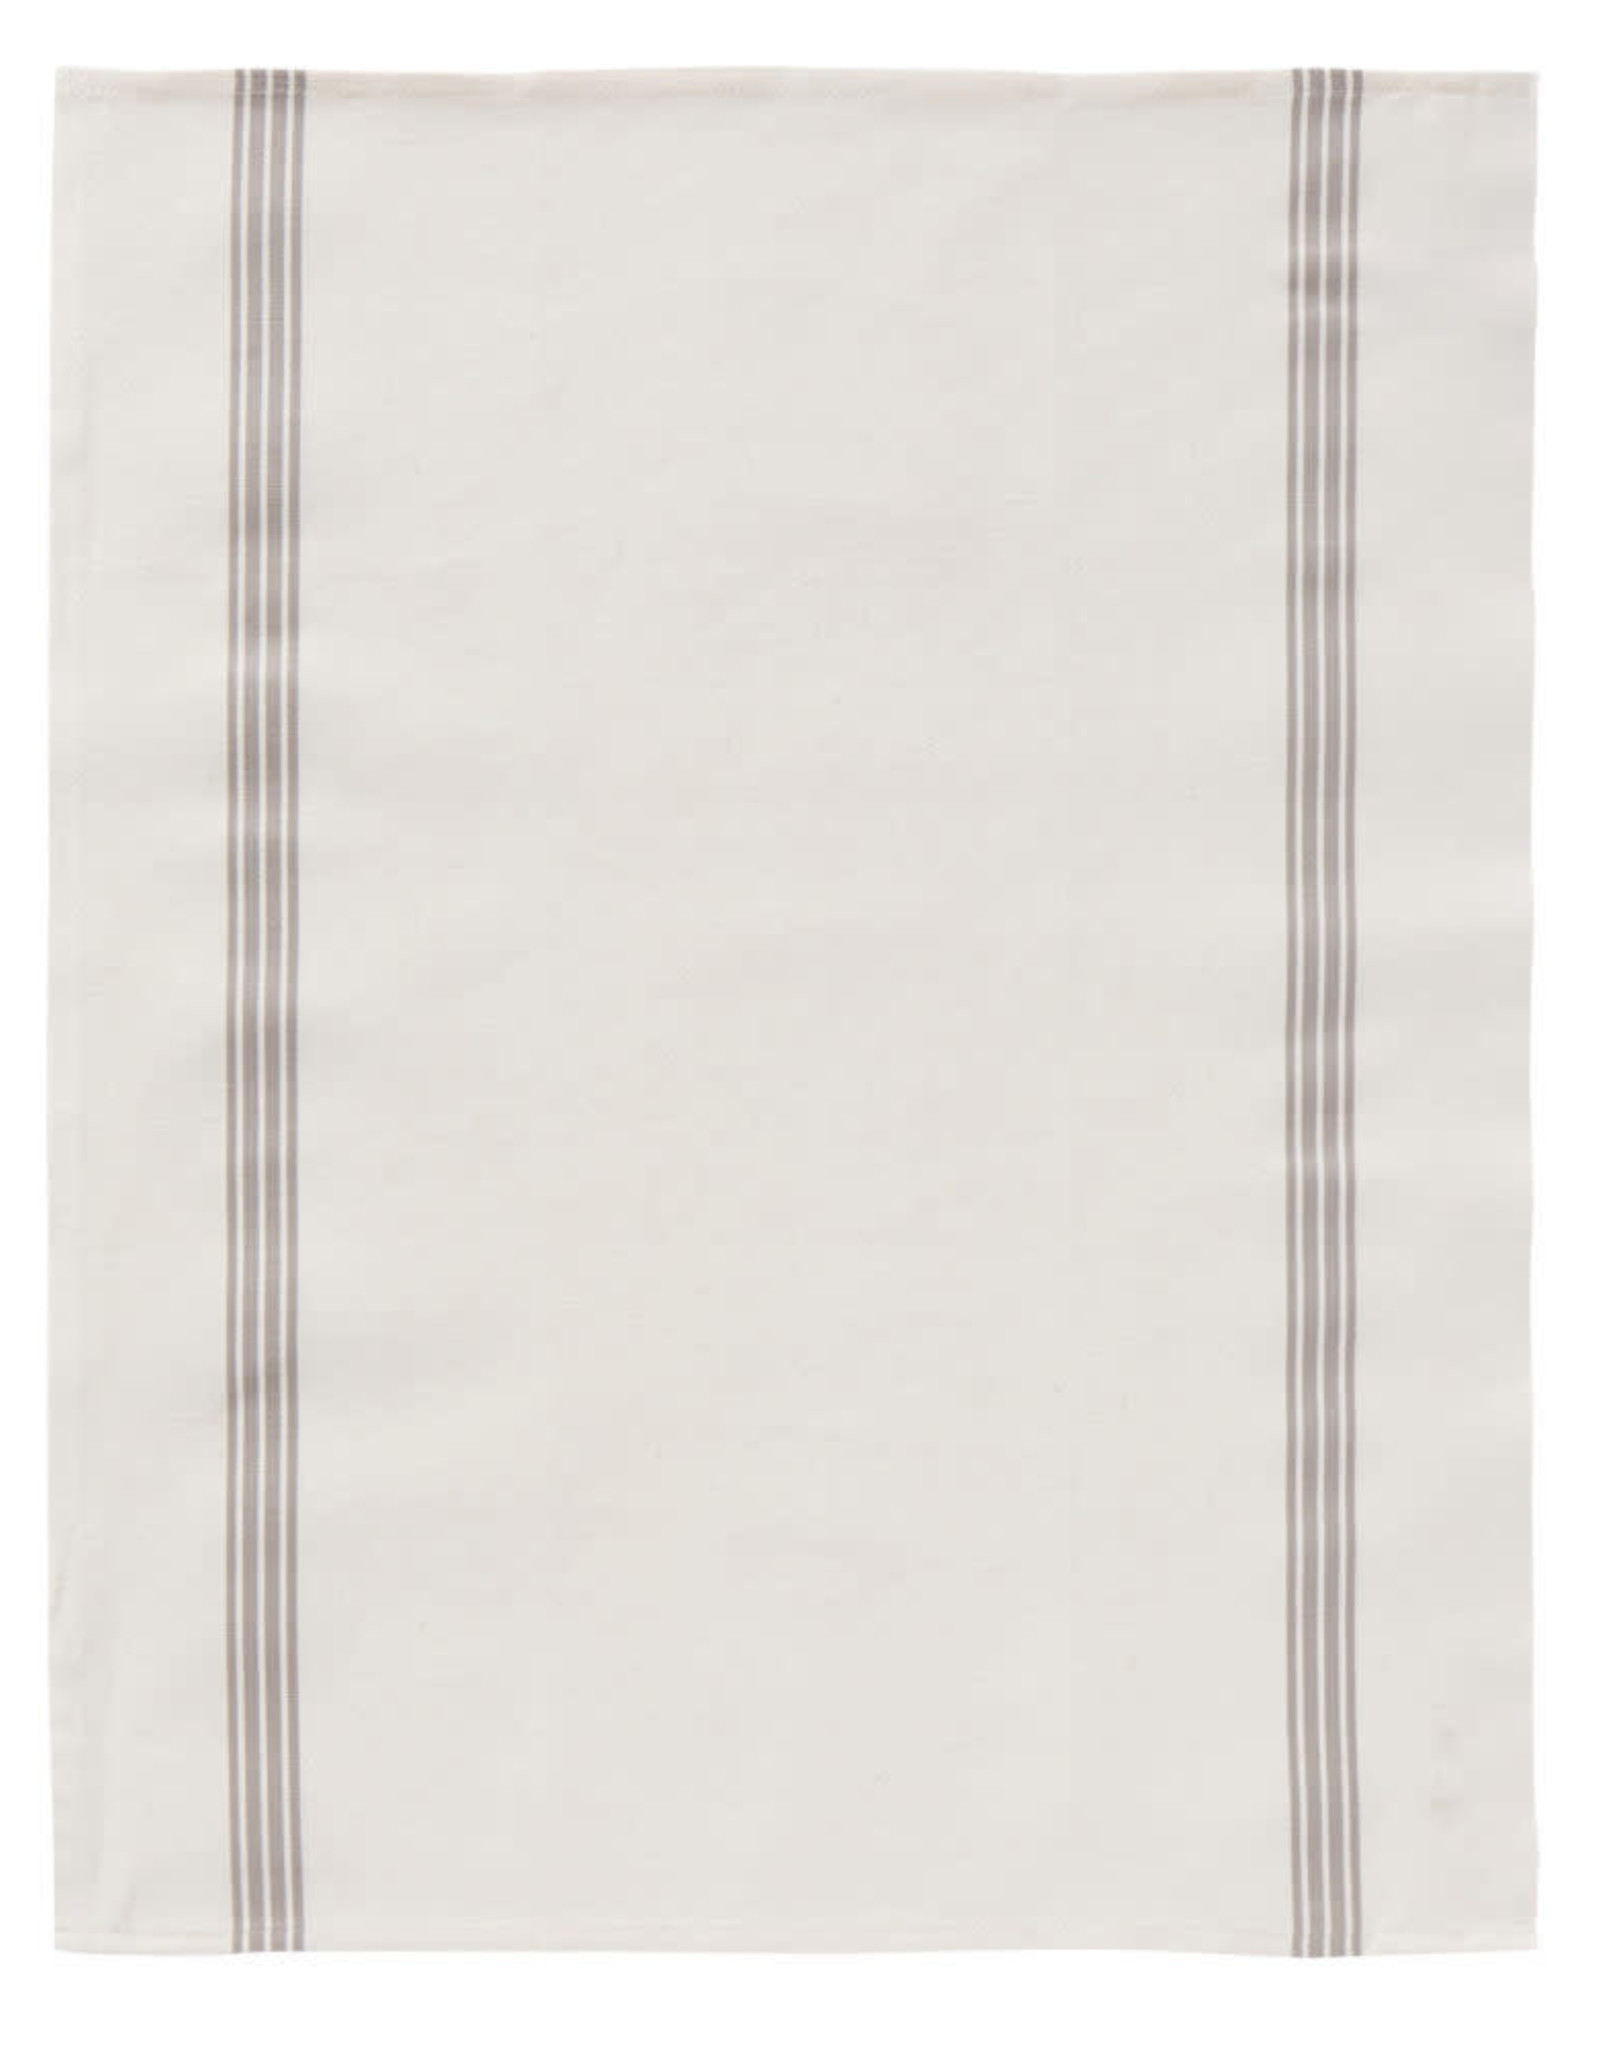 Piano Linen Teatowel with Taupe Stripe